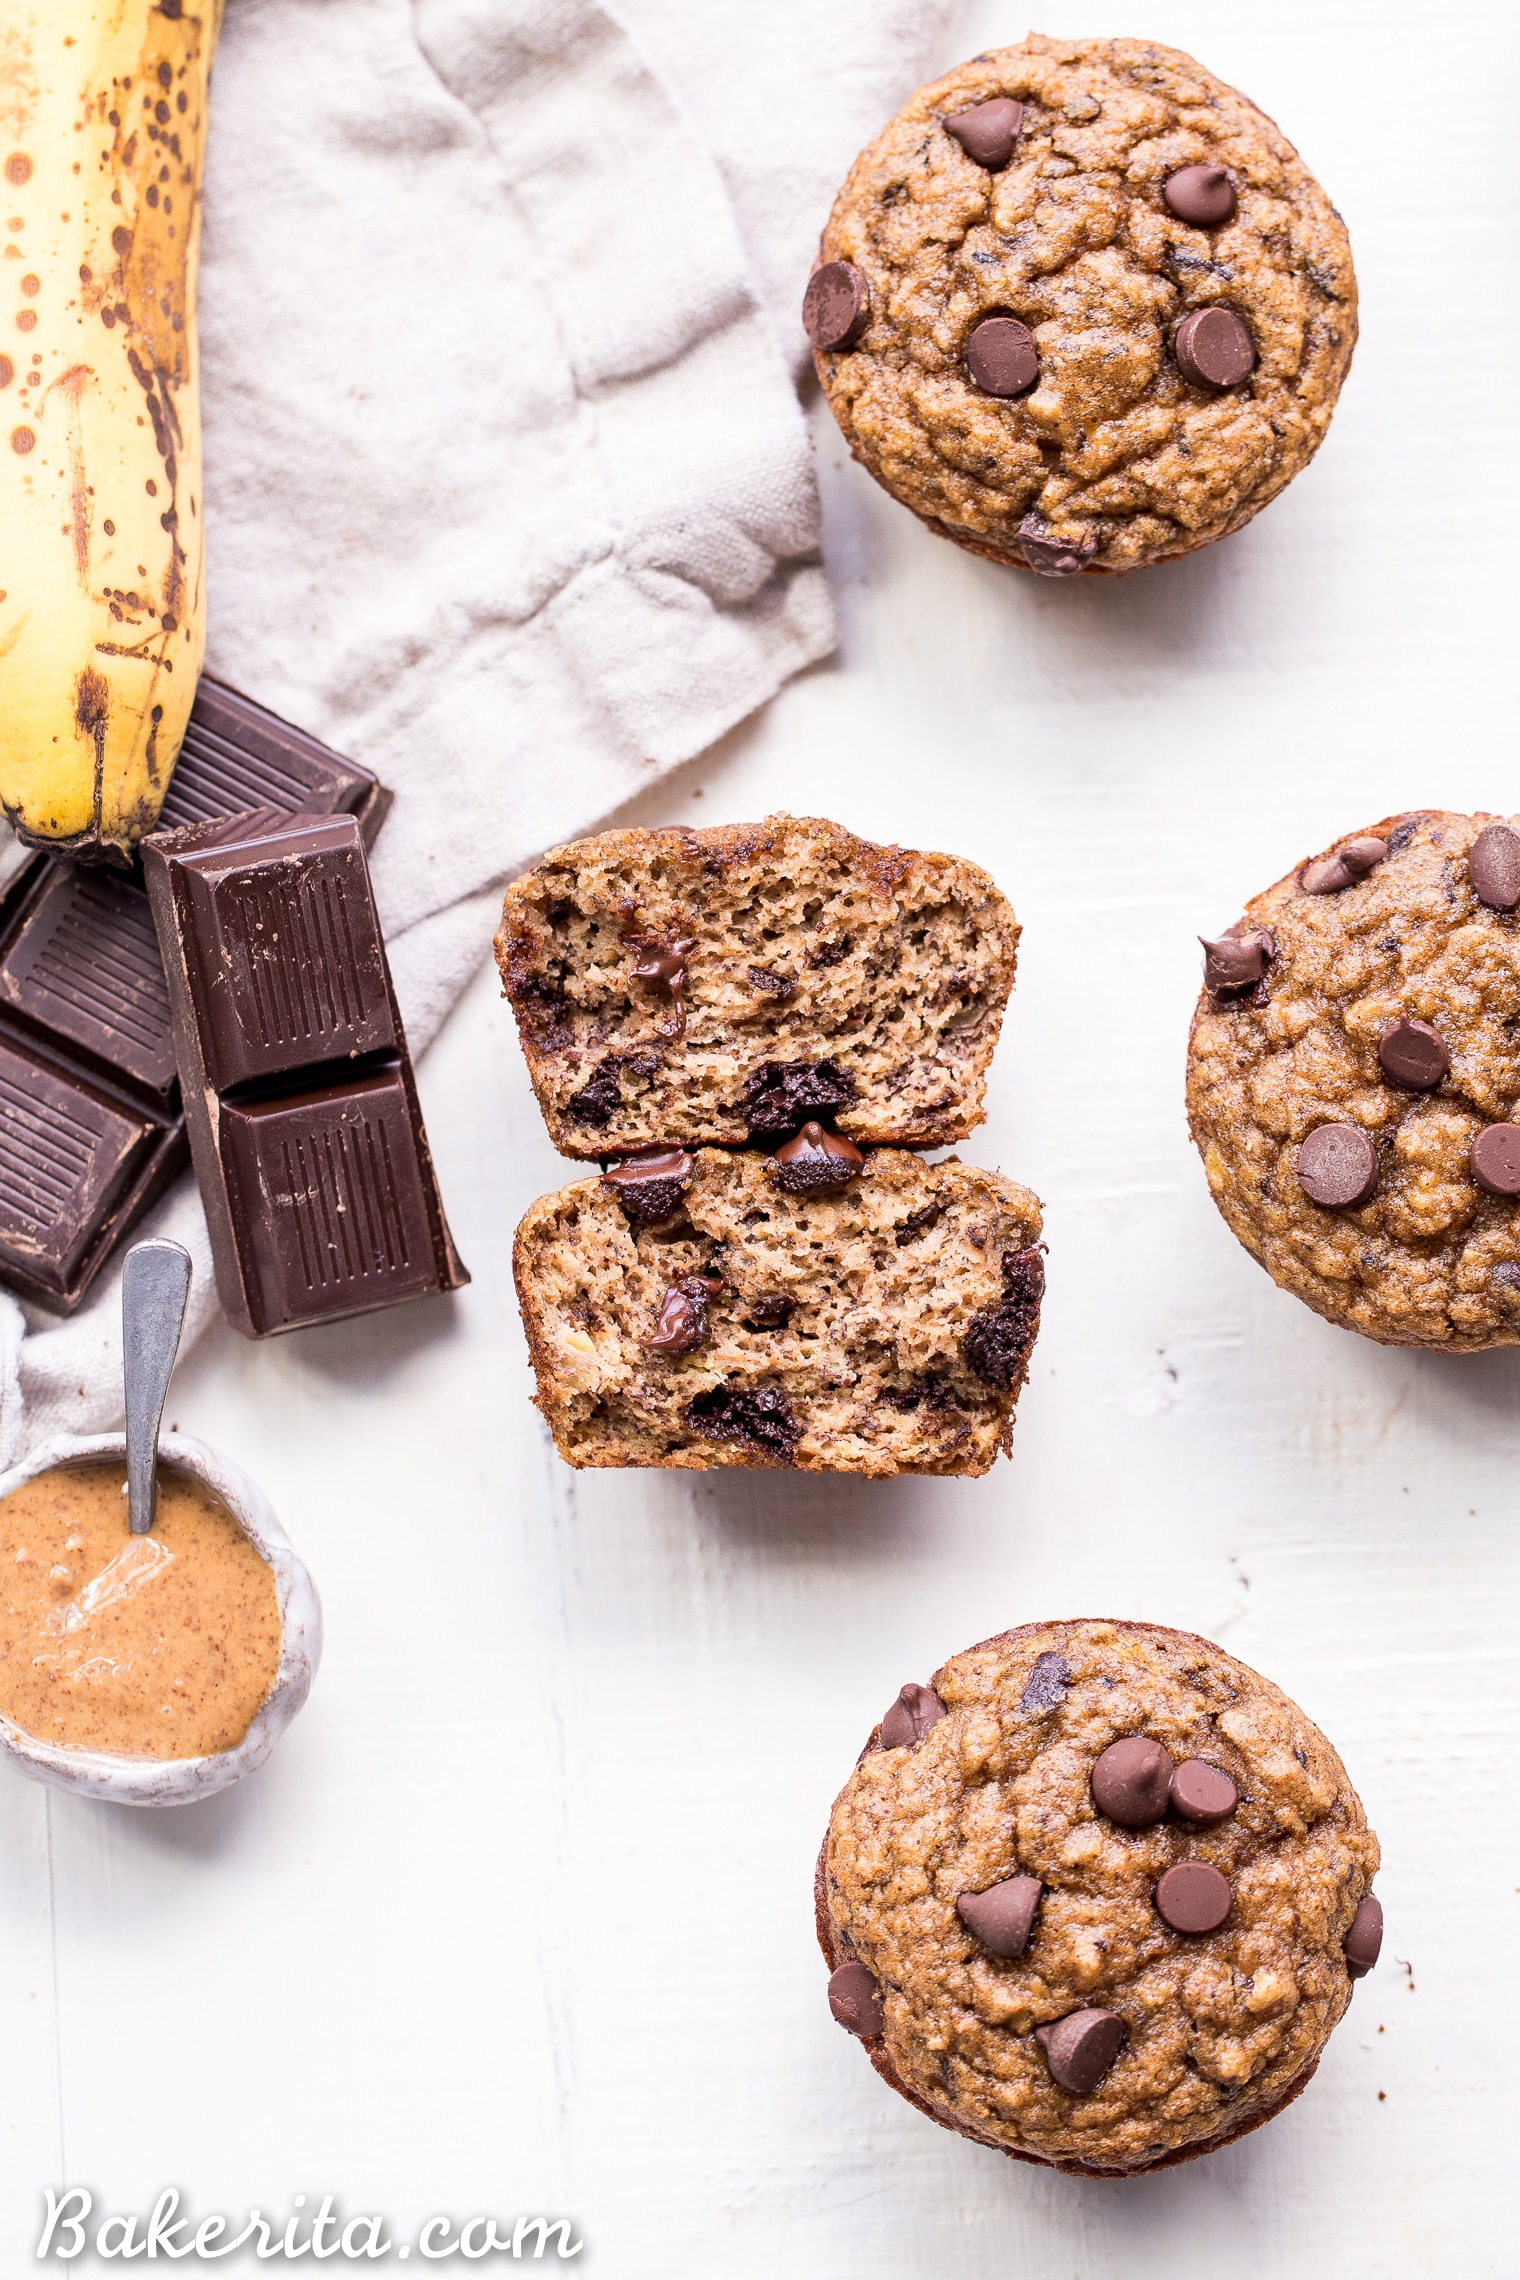 These Paleo Almond Butter Chocolate Chip Banana Muffins taste just like your mom's homemade banana chocolate chip muffins, but way healthier than the ones you remember. They're gluten-free, grain-free, dairy-free, and have no sugar added - these muffins are sweetened with only bananas!